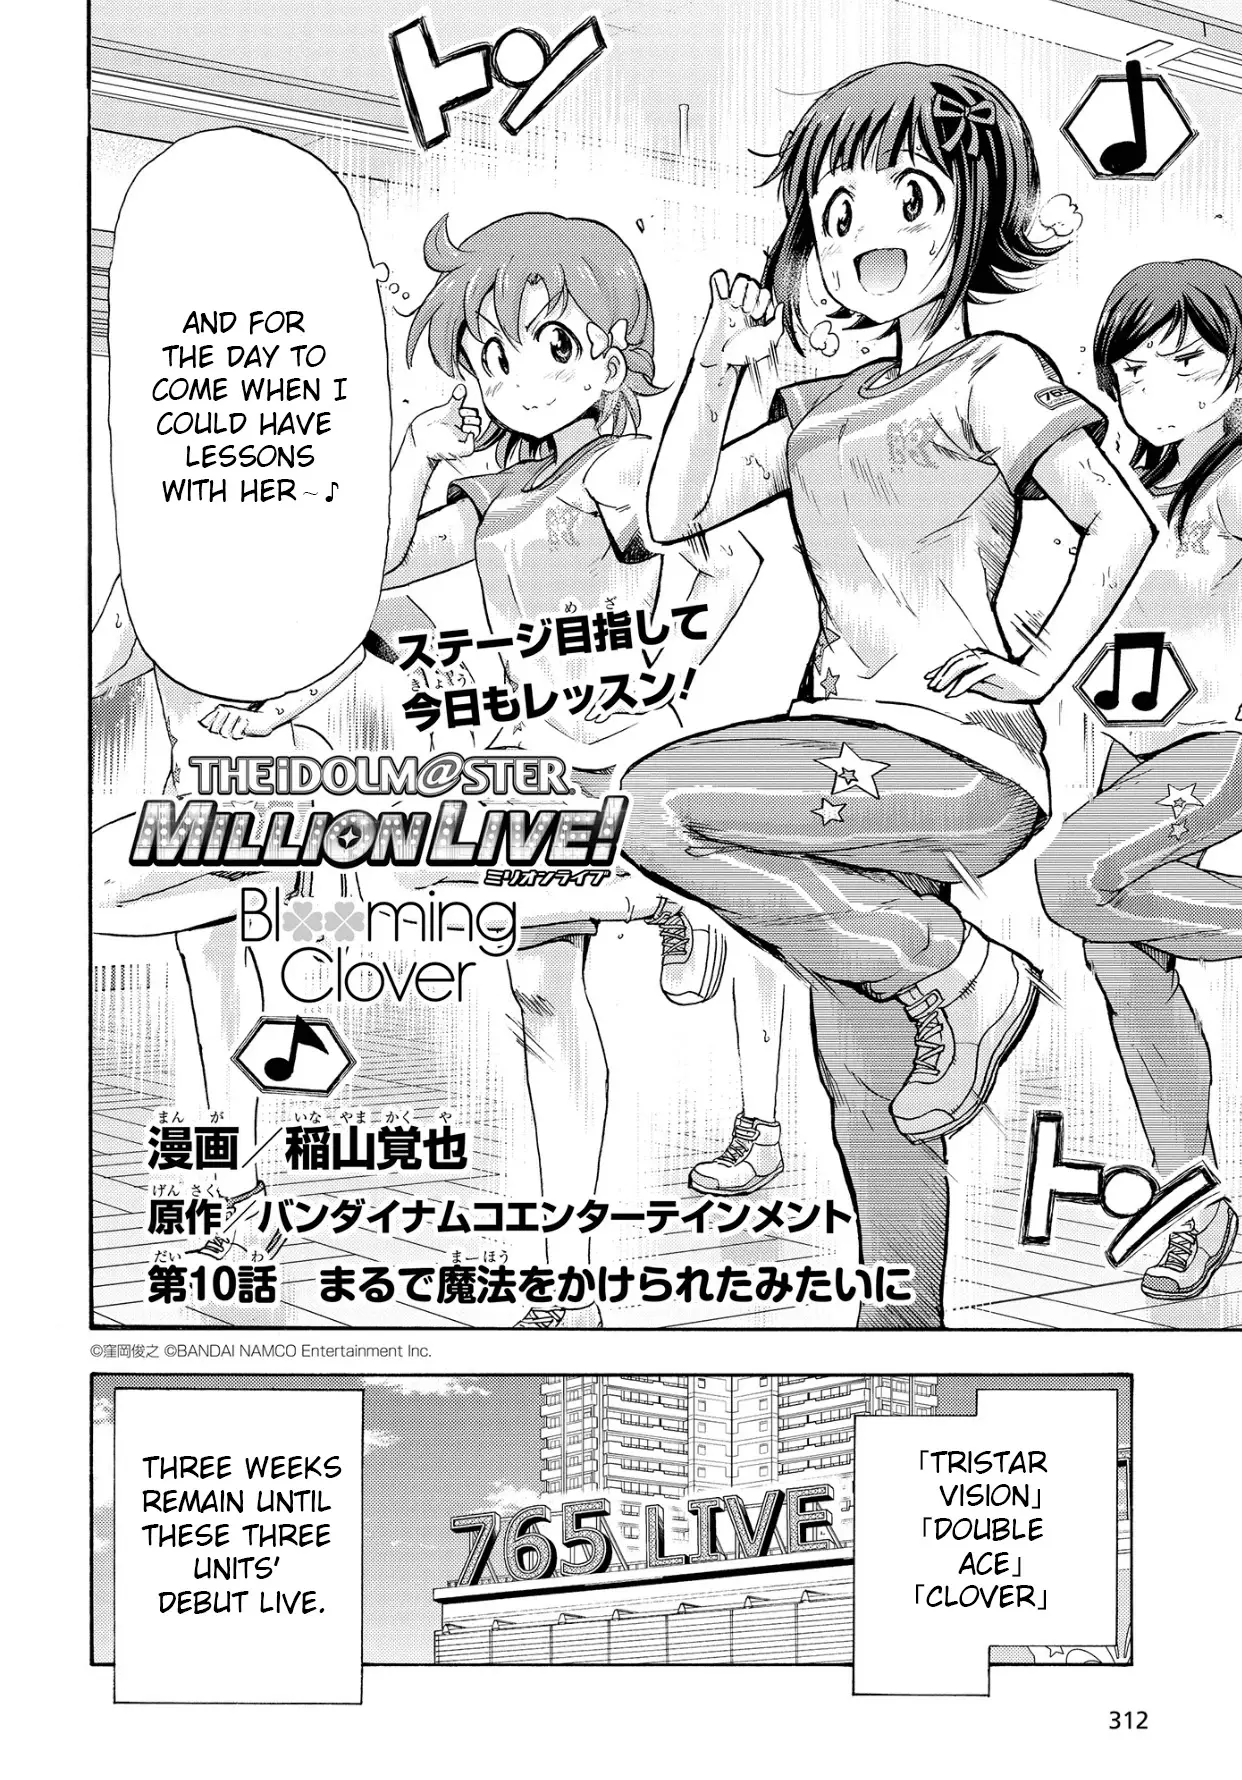 The Idolmaster Million Live! Blooming Clover - 10 page 2-461eeb7f